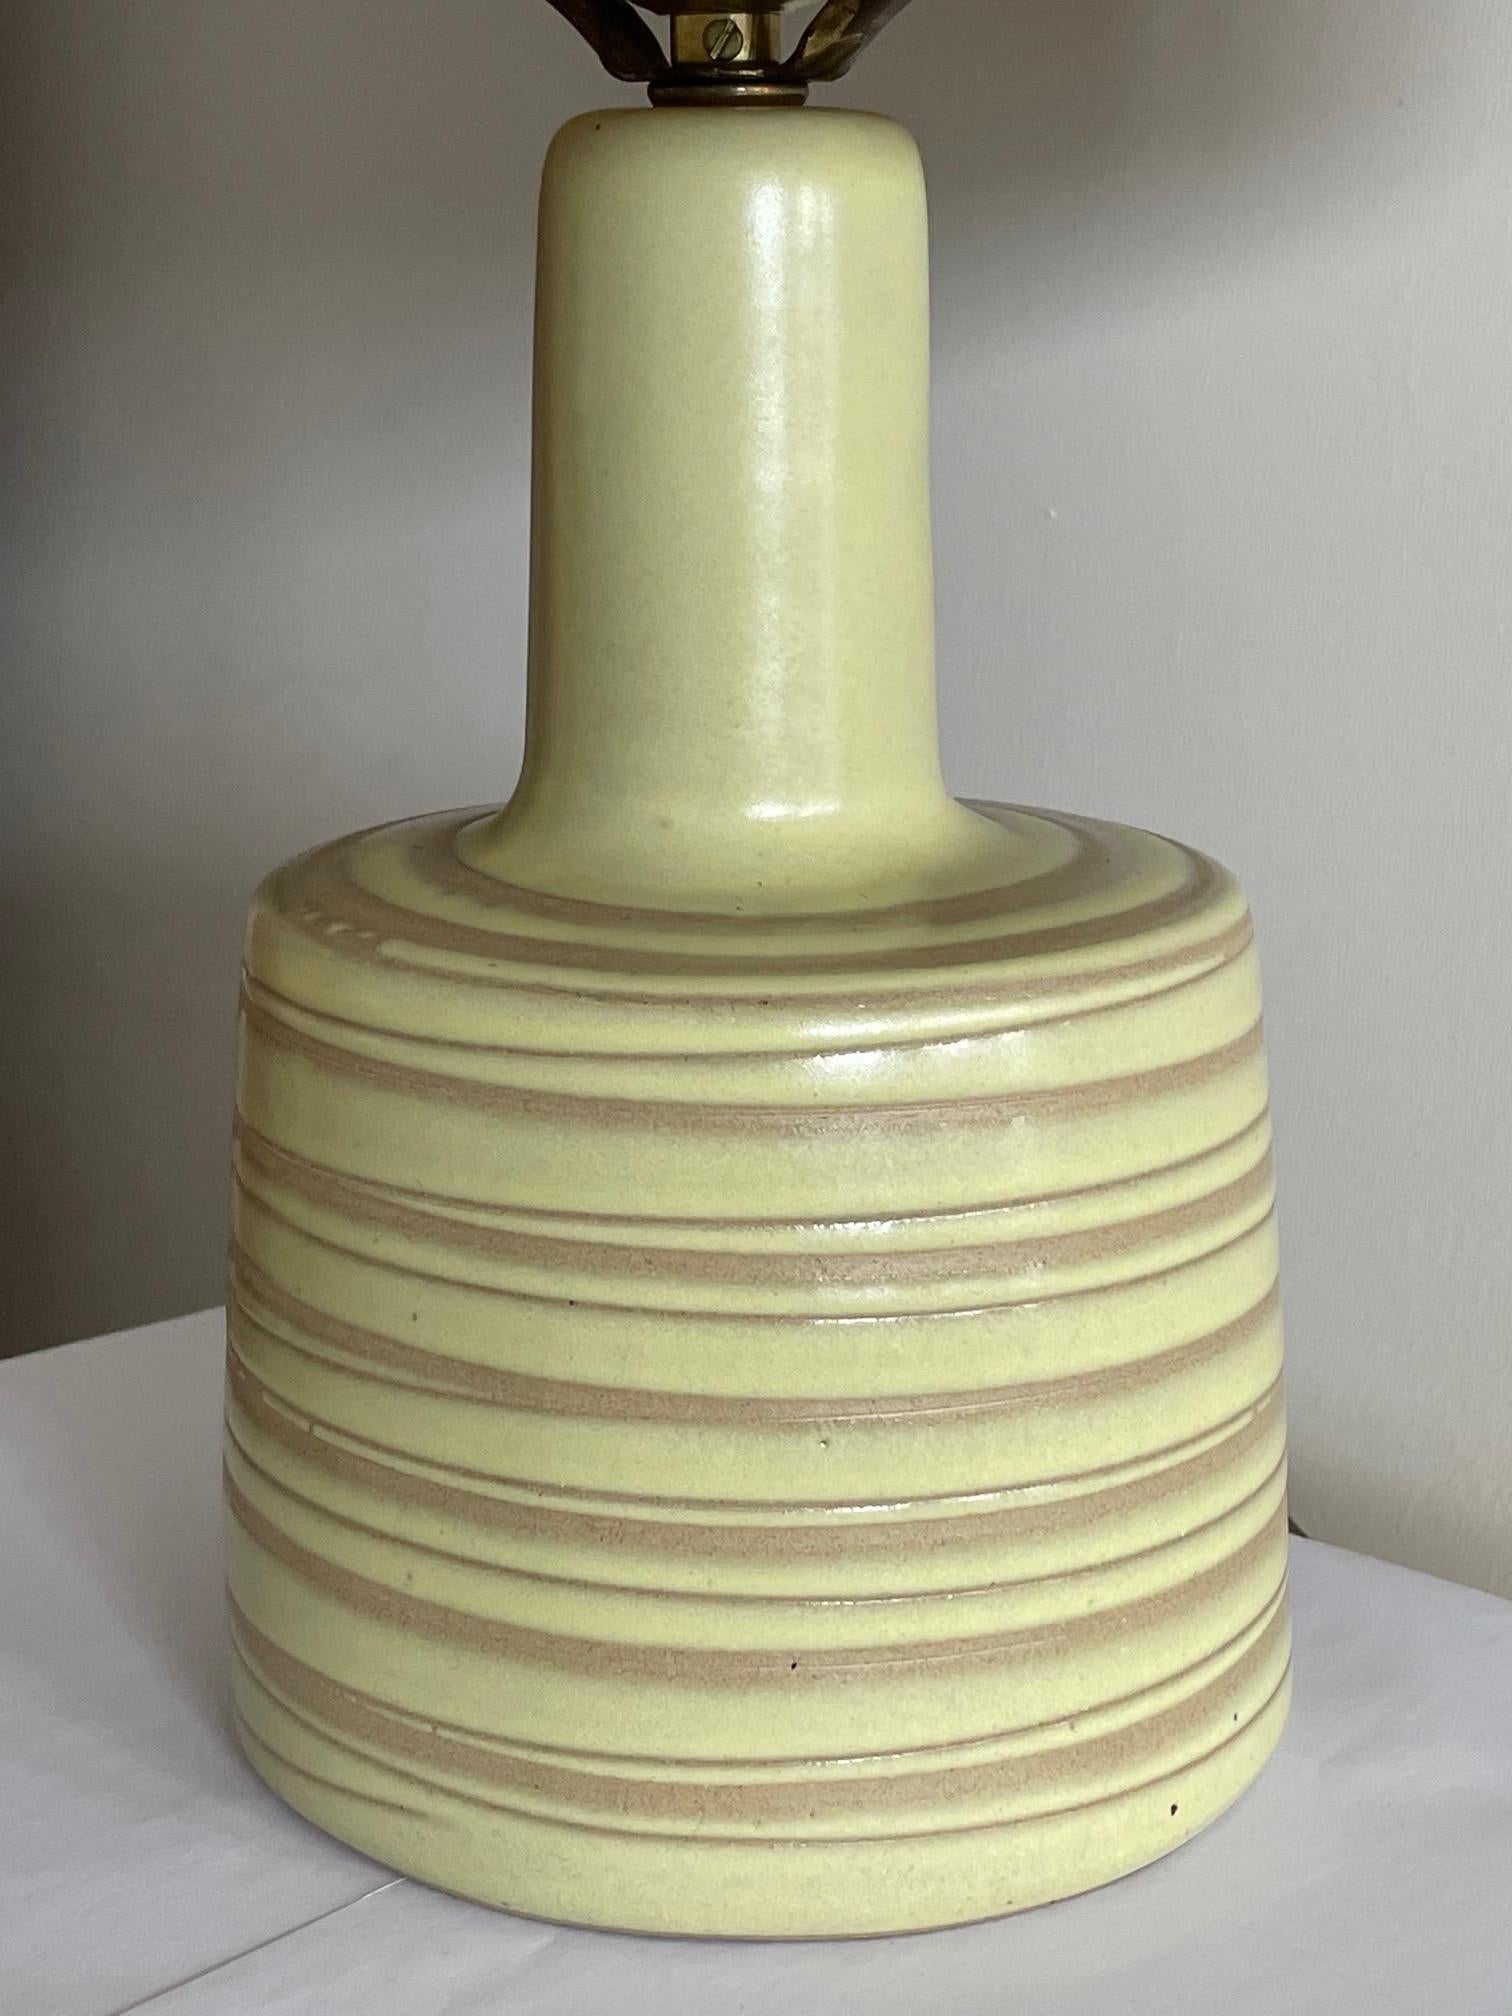 North American Charming Ceramic Lamp by Martz For Sale